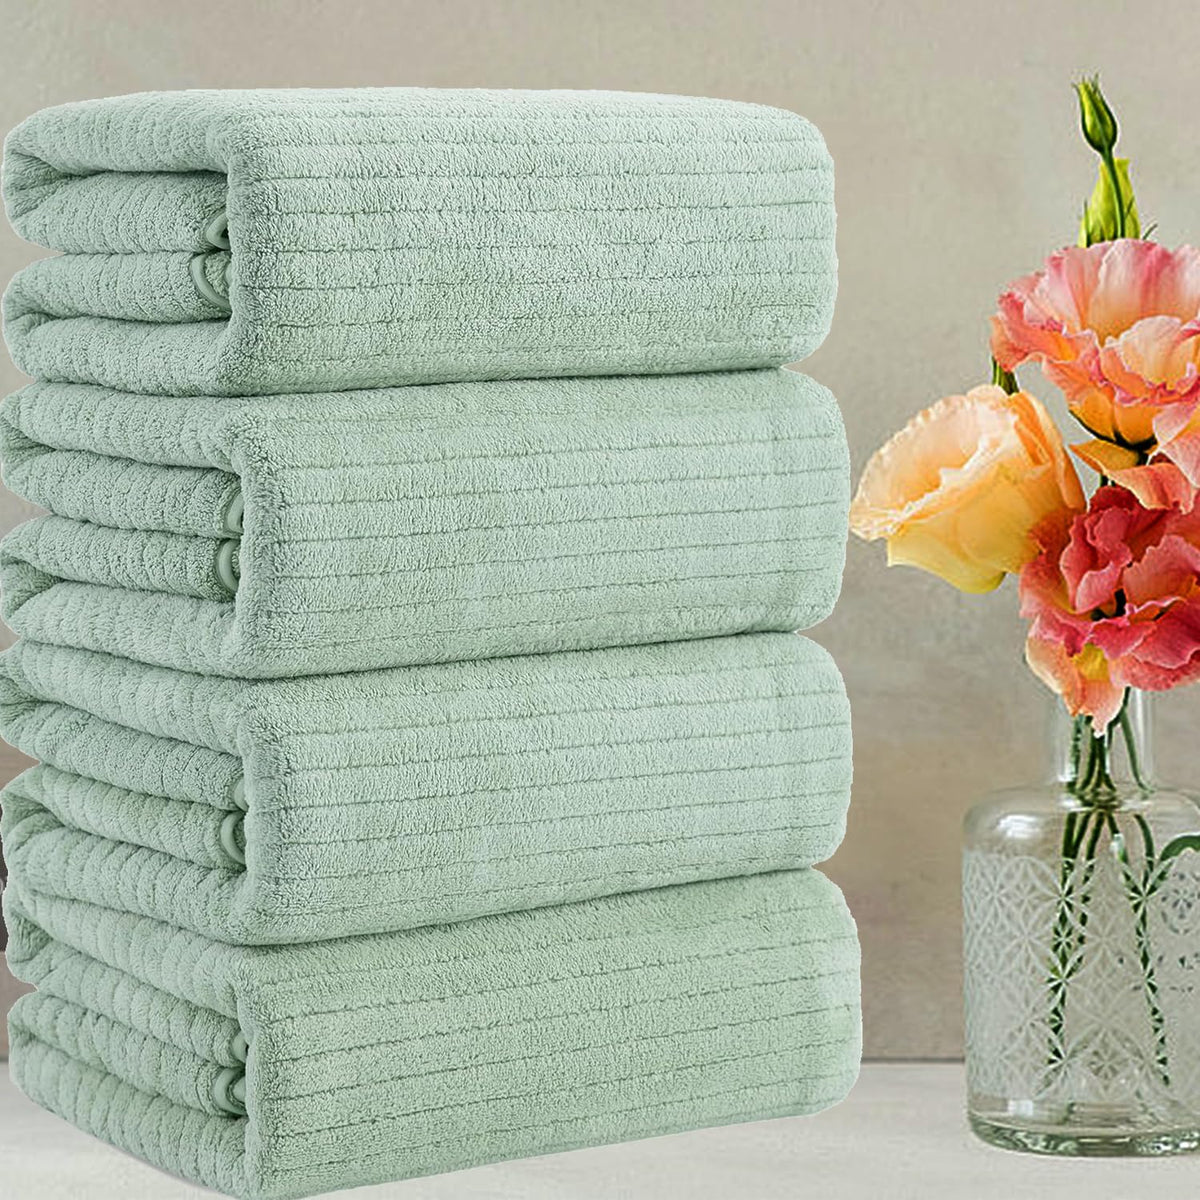 Smuge 2 Pack Oversized Bath Sheet Towels (35 x 70 in,White) 700